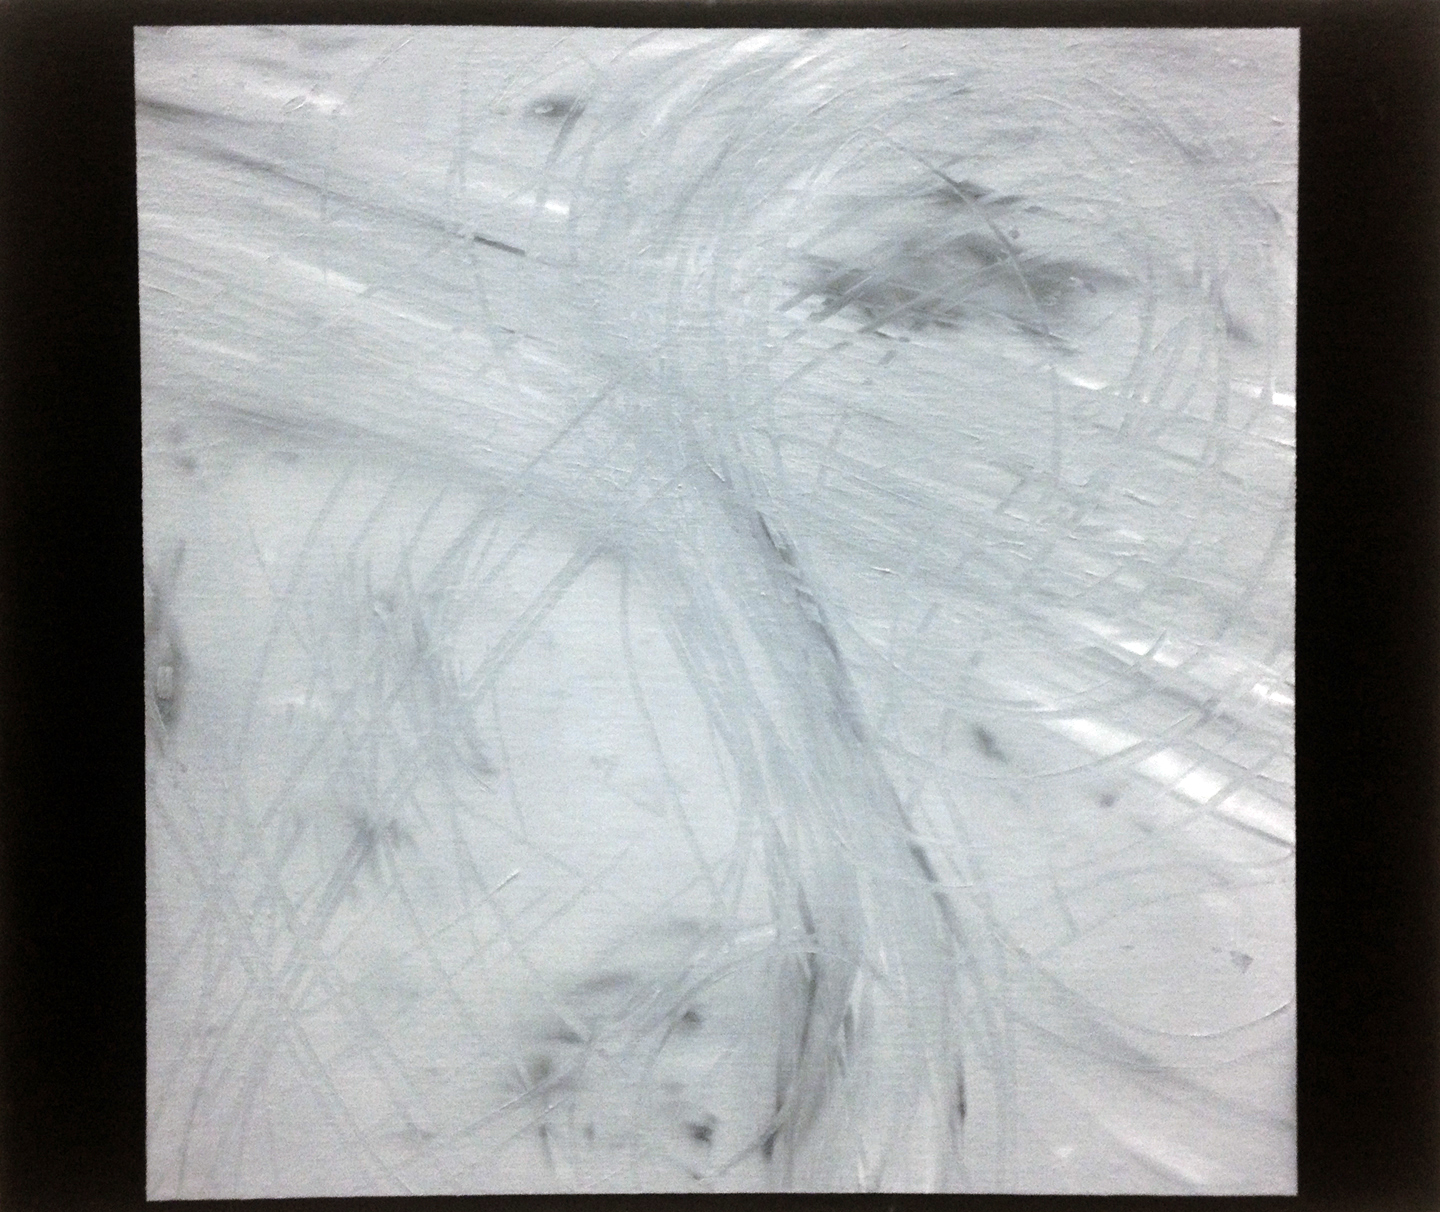   Screenshot (Tire Tracks),  2013 Oil on canvas 13 x 13 inches 